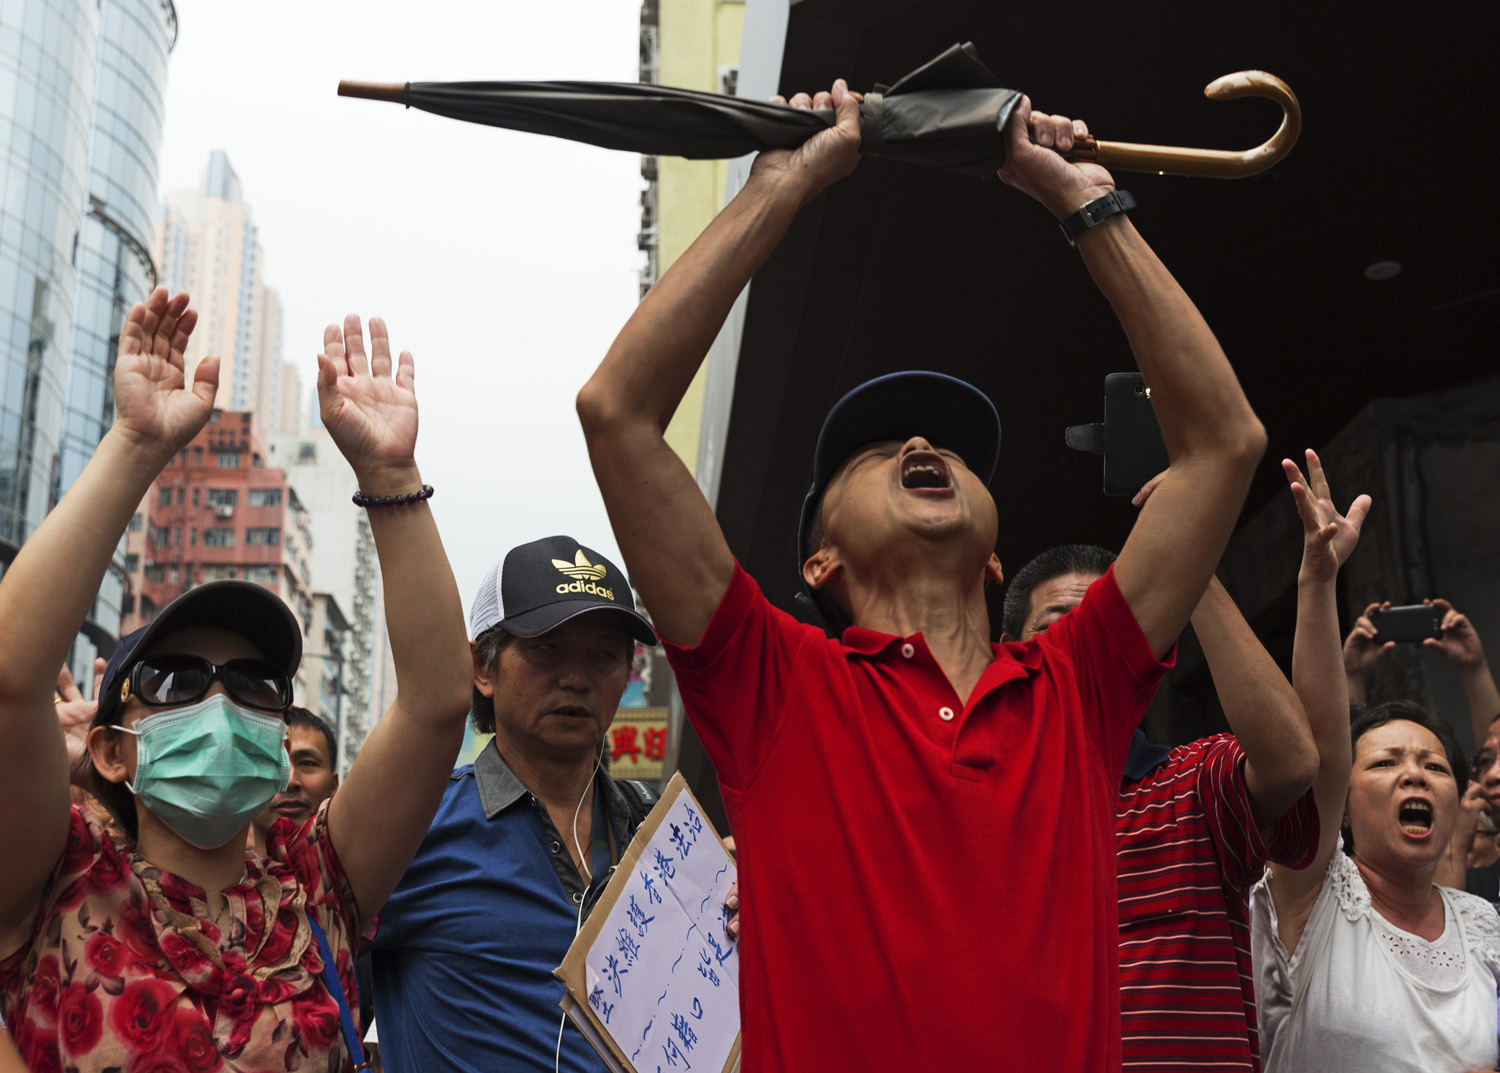 A counter protest group in Mongkok during democracy demonstrations in the Mong Kong district of Hong Kong.